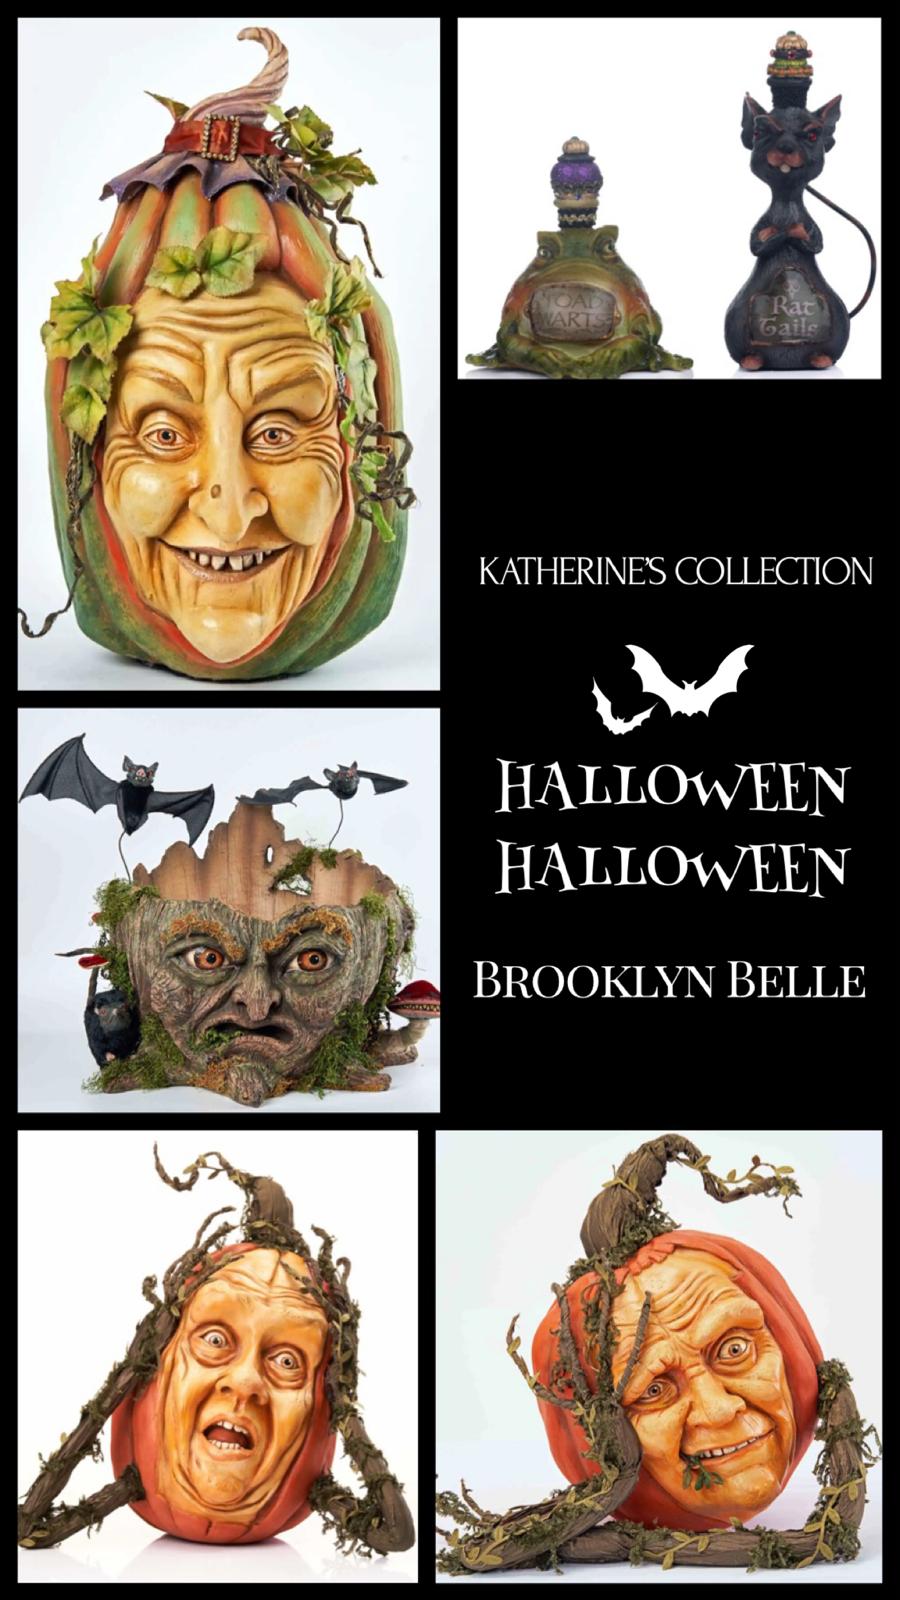 Katherine's Collection Halloween Decor Wanda Witch Trick or Treater Figure